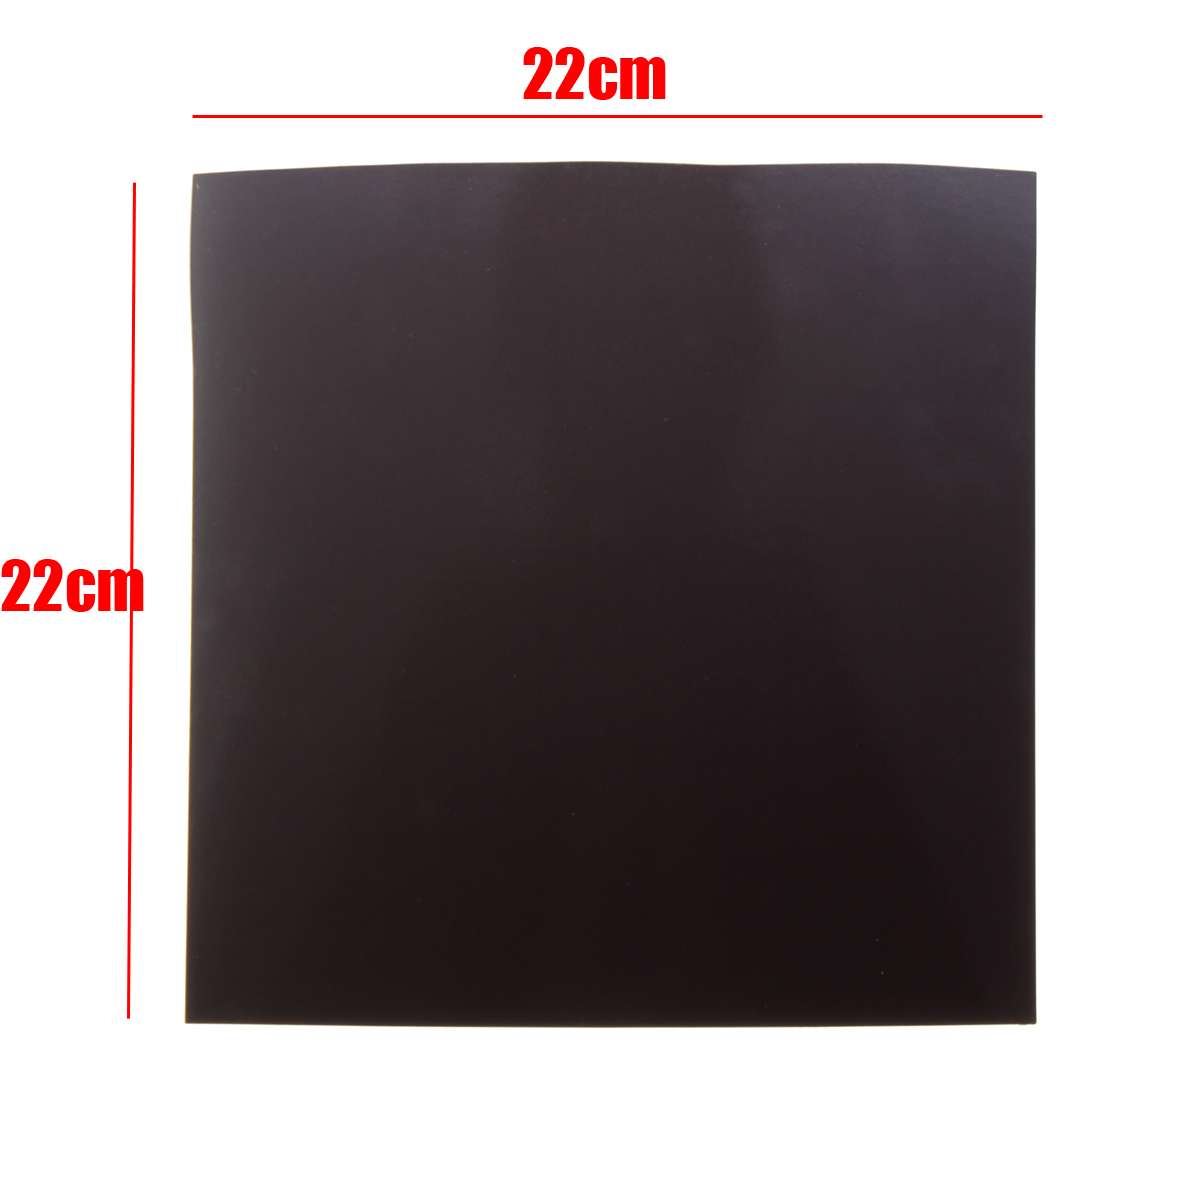 22x22cm A+B Magnetic Sheet Surface Platform Sticker For 3D Printer Creality Ender-3 Heated Bed 12